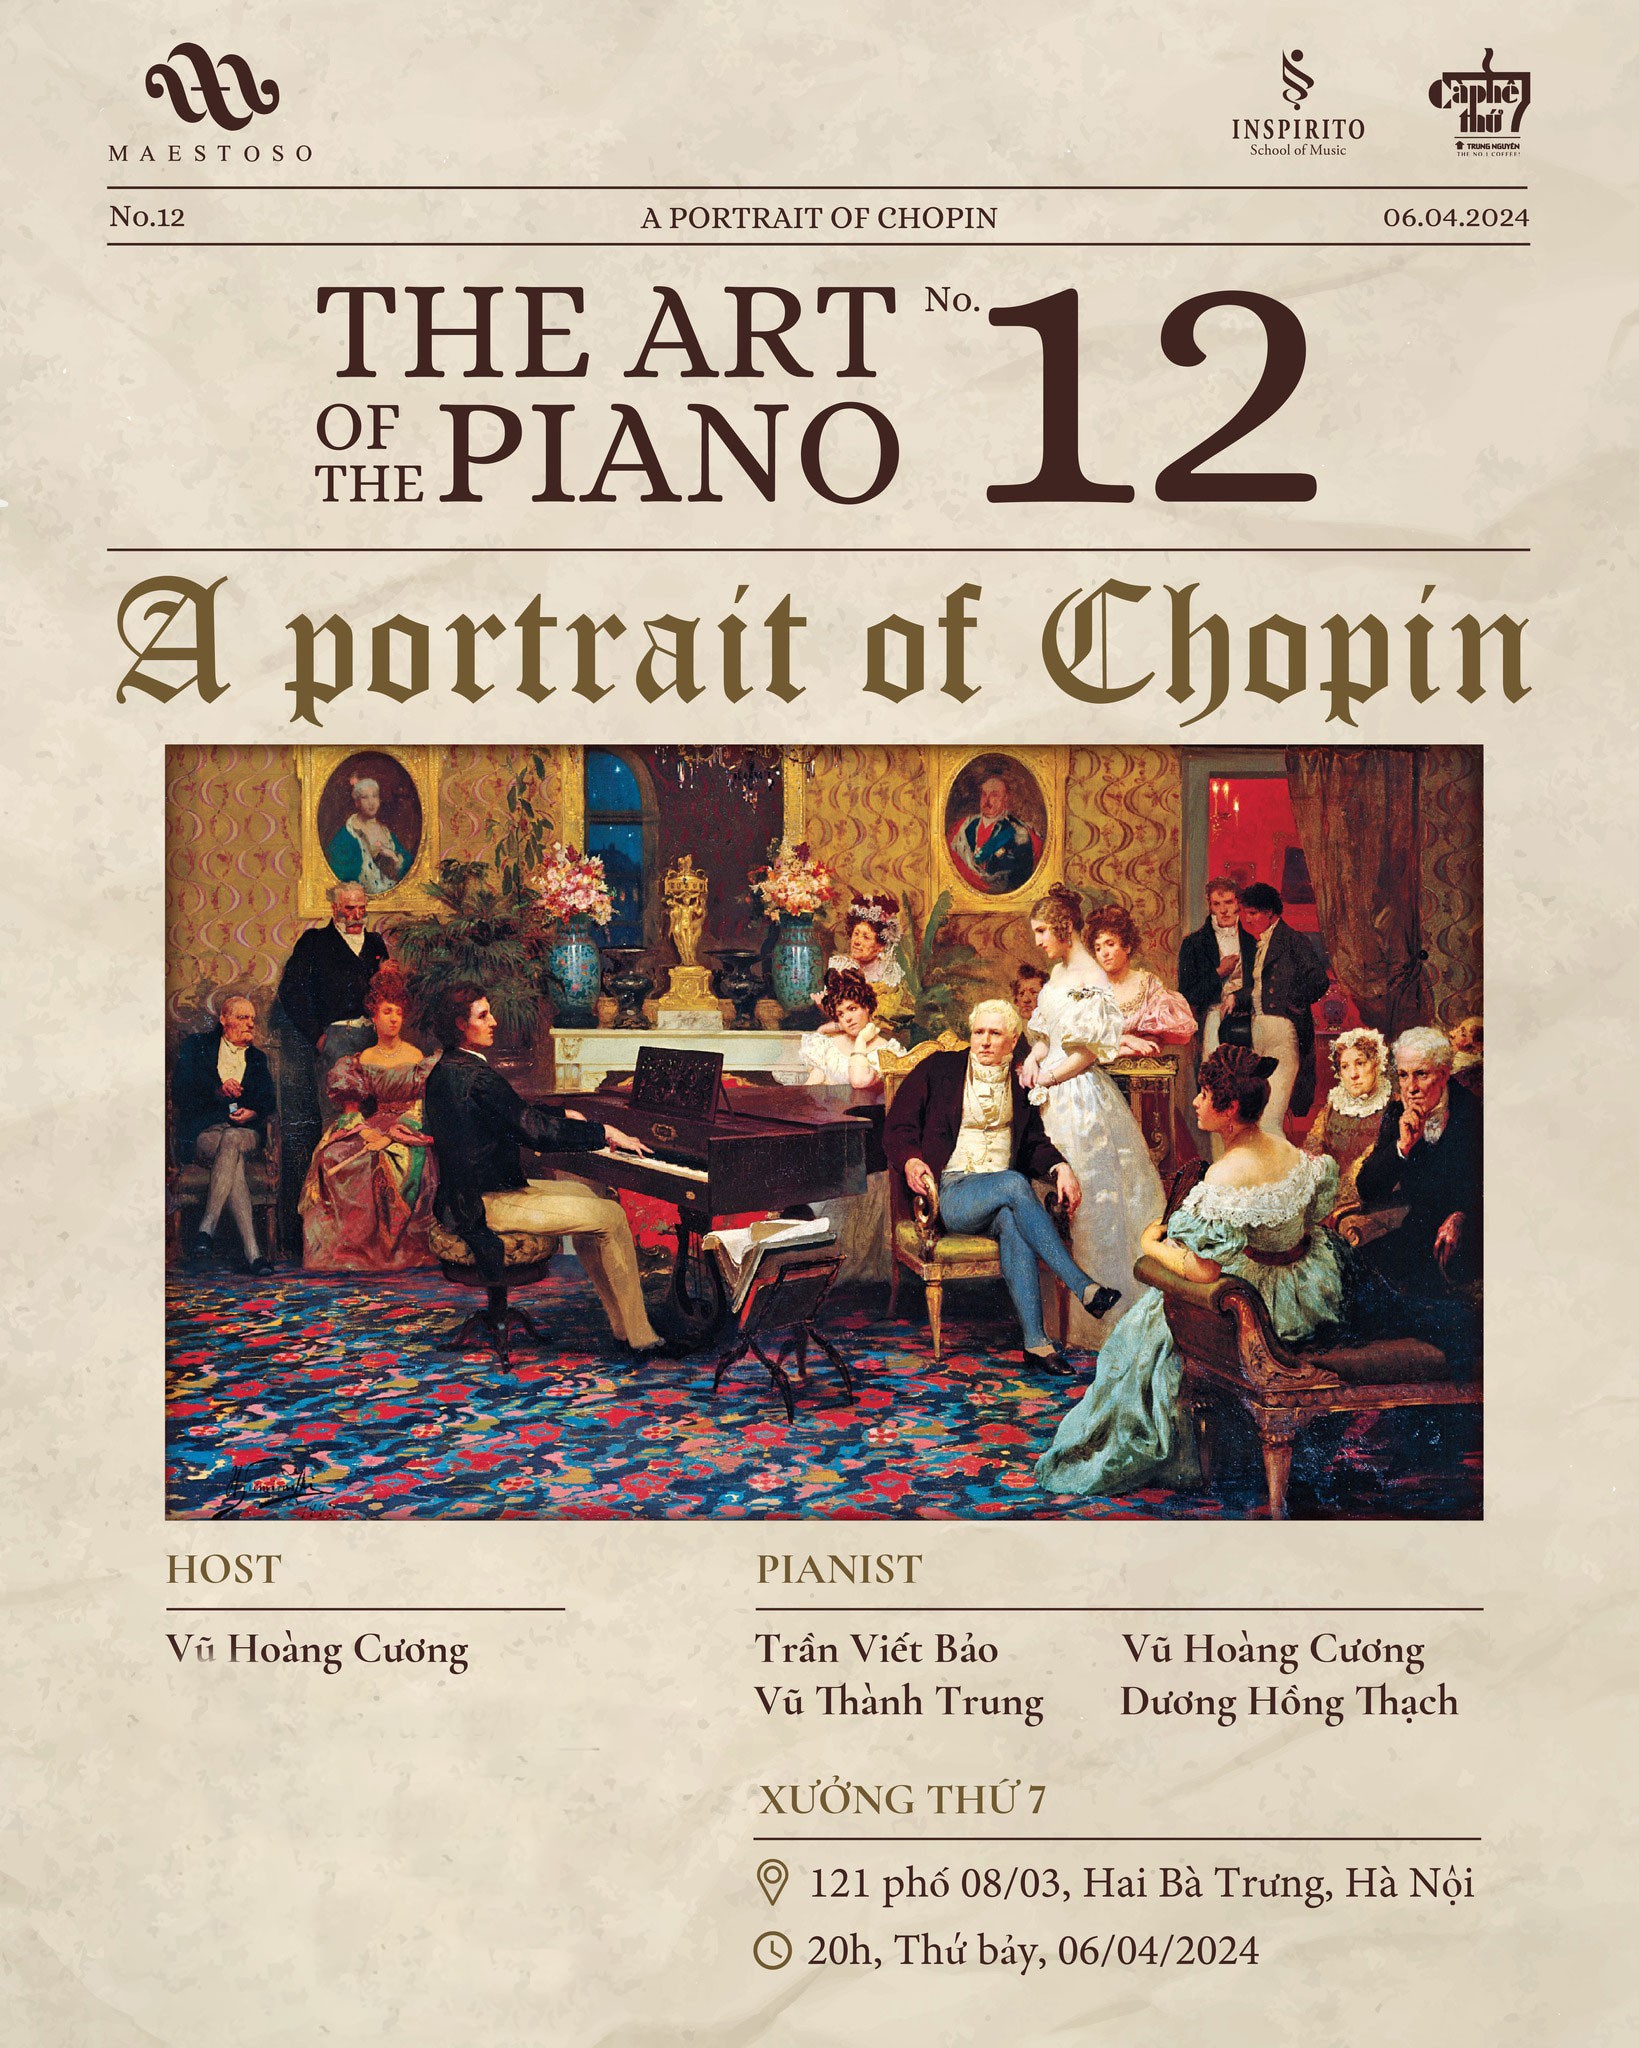 The Art of the Piano No.12; A portrait of Chopin